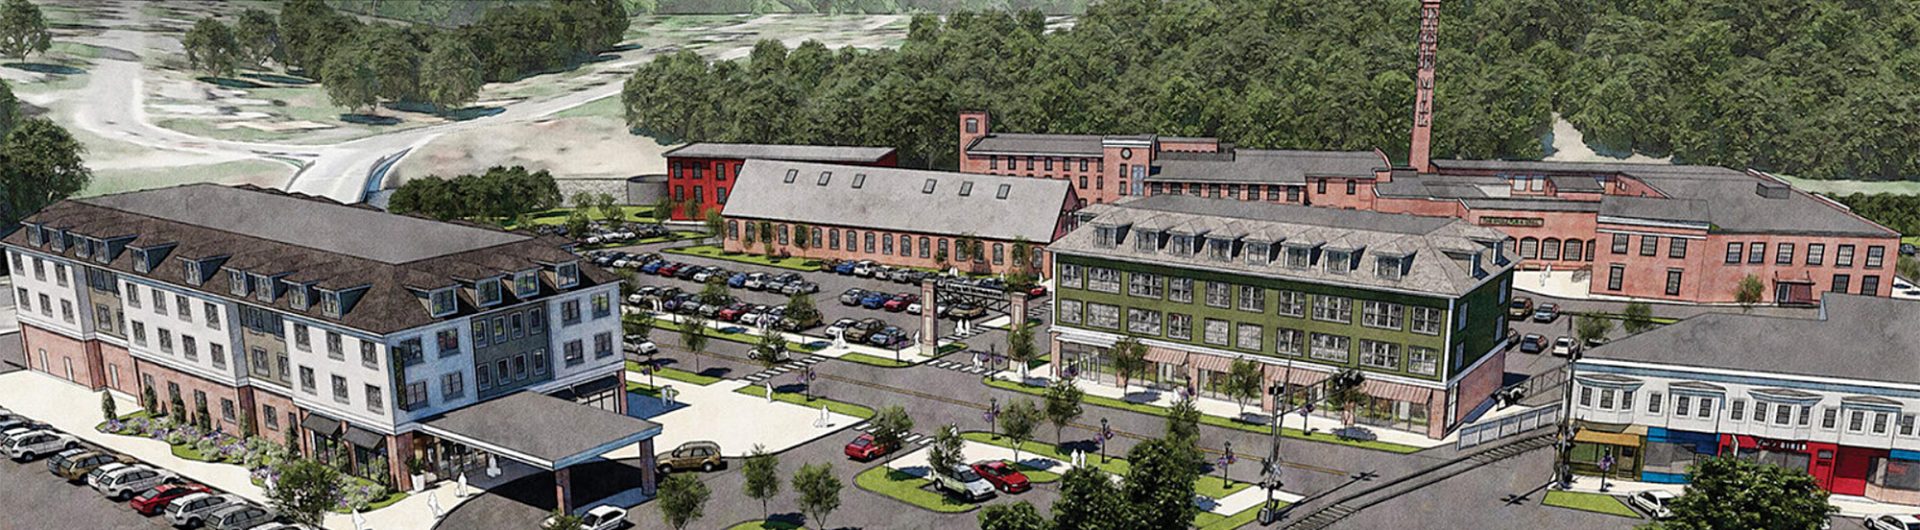 An artist’s rendering of the Eagle Mill redevelopment project in Lee.